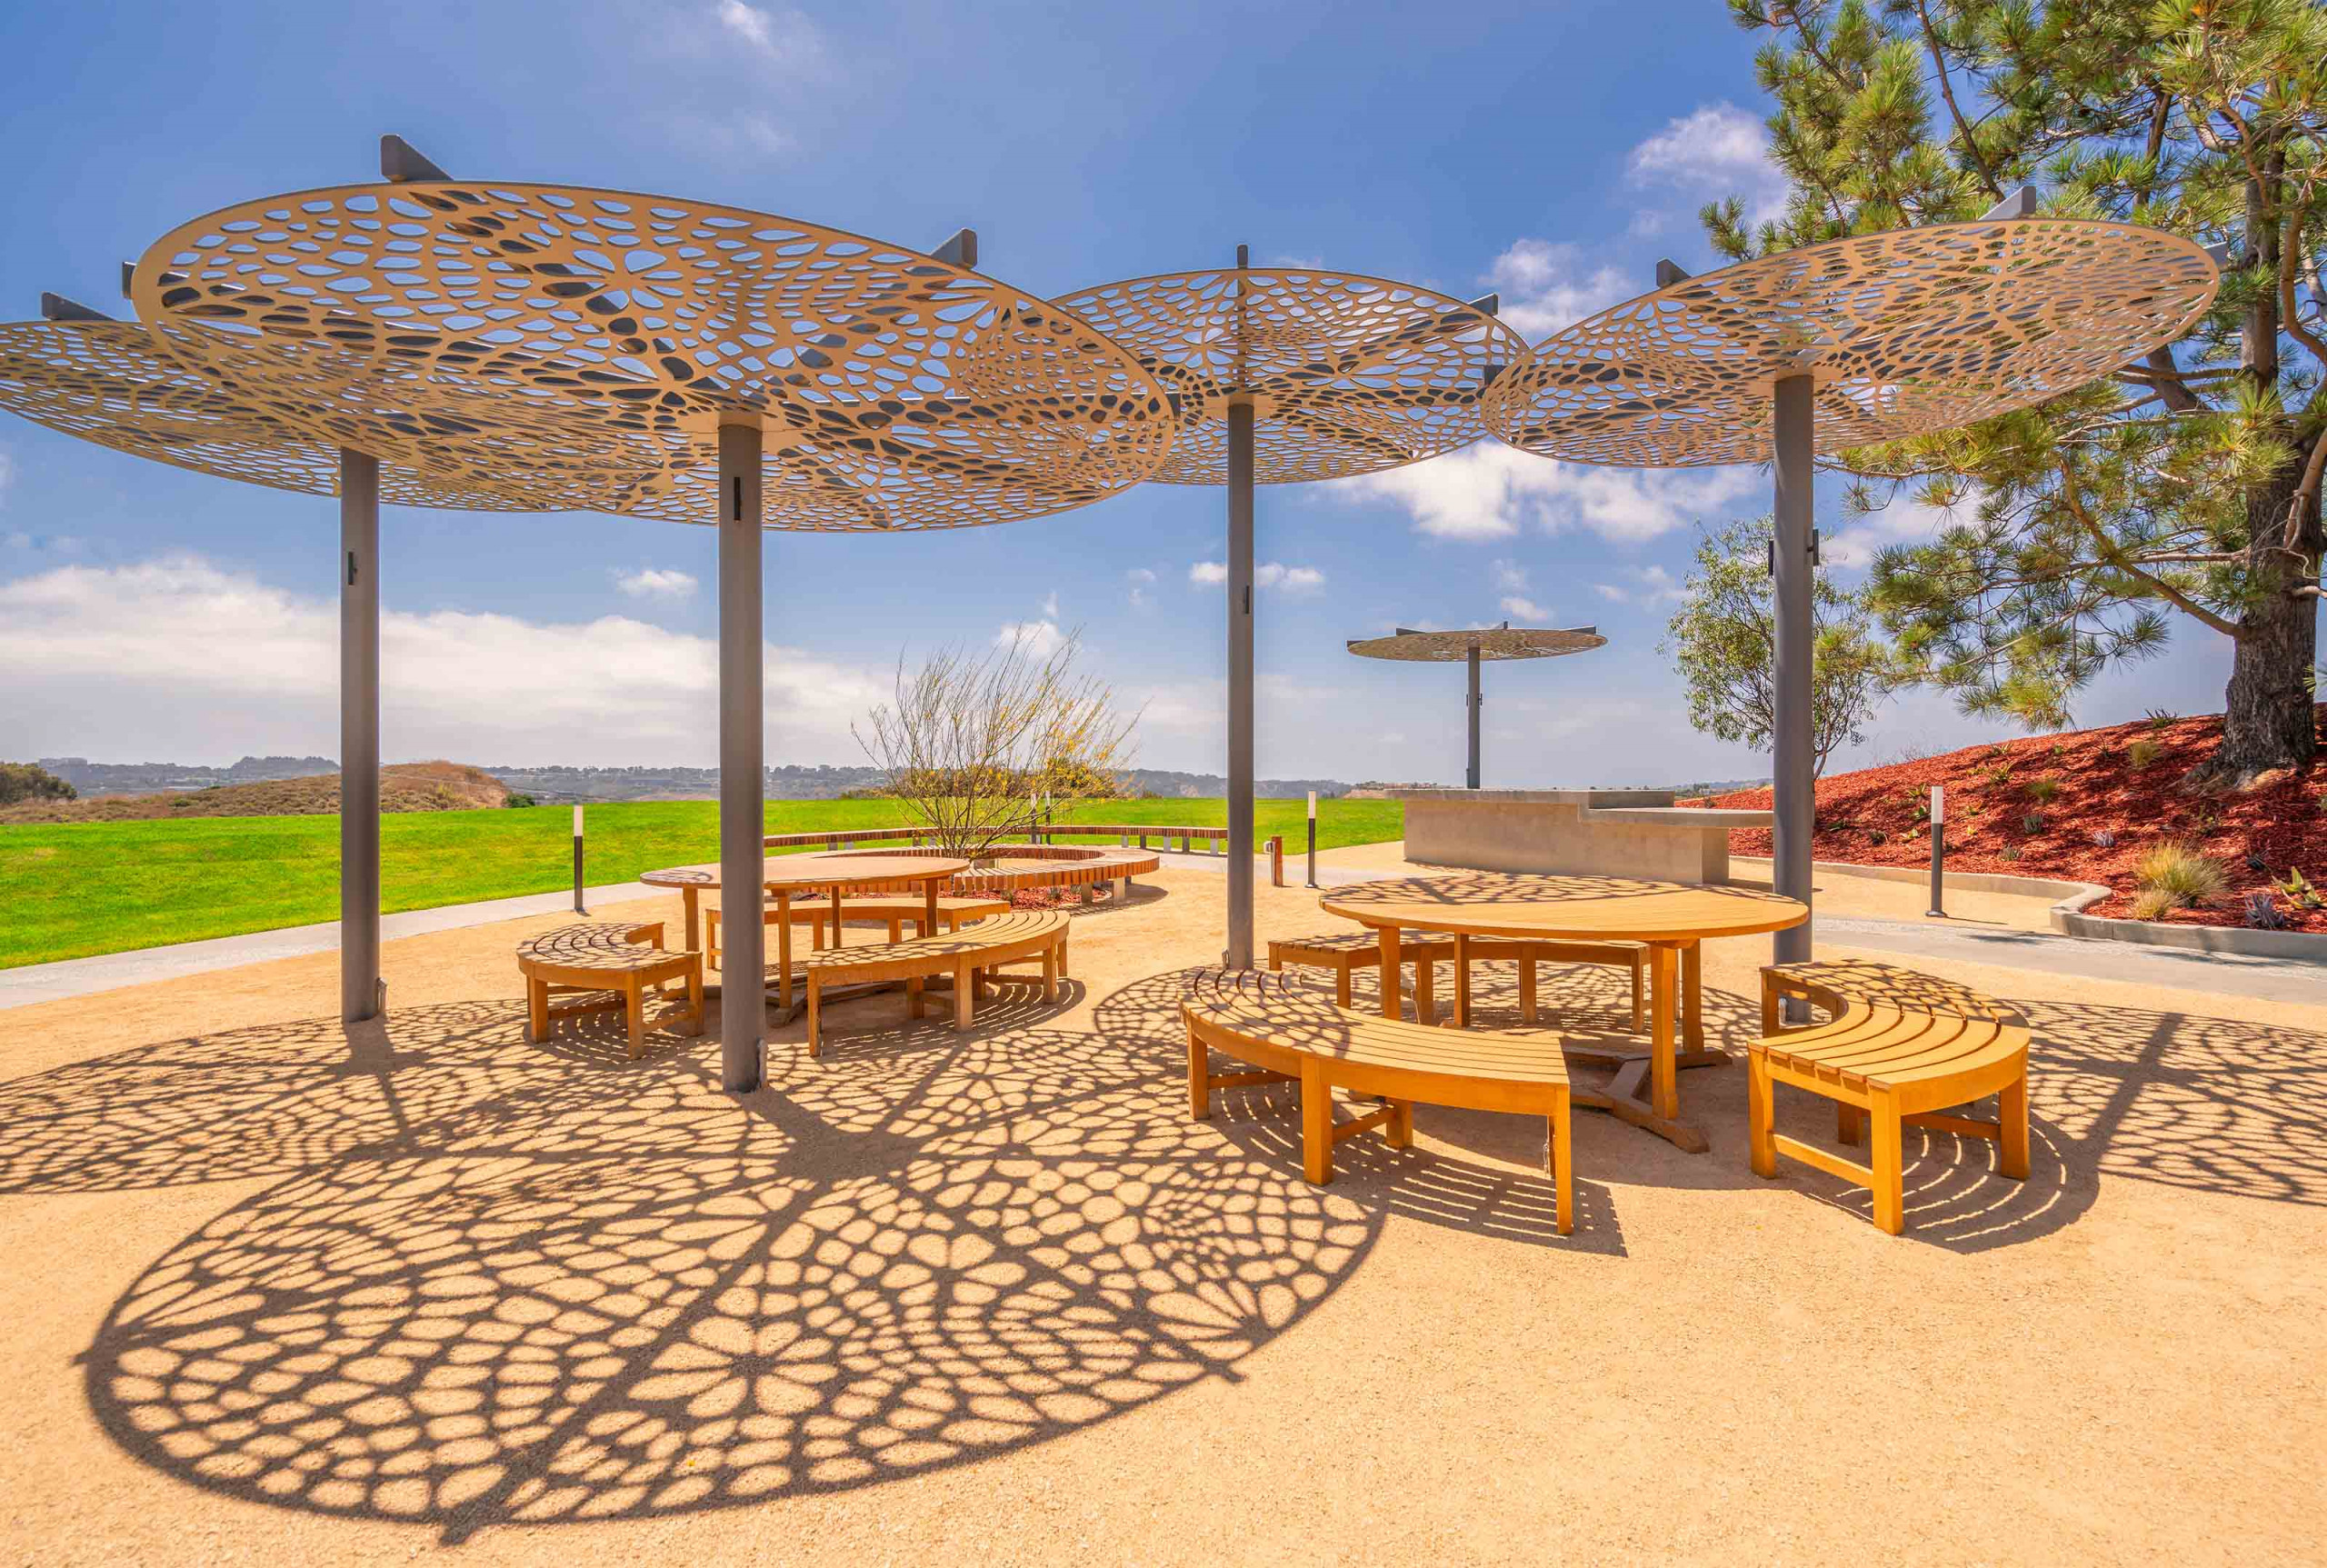 This outdoor area with tables and chairs features several Arktura canopies that resemble umbrellas above the tables. 